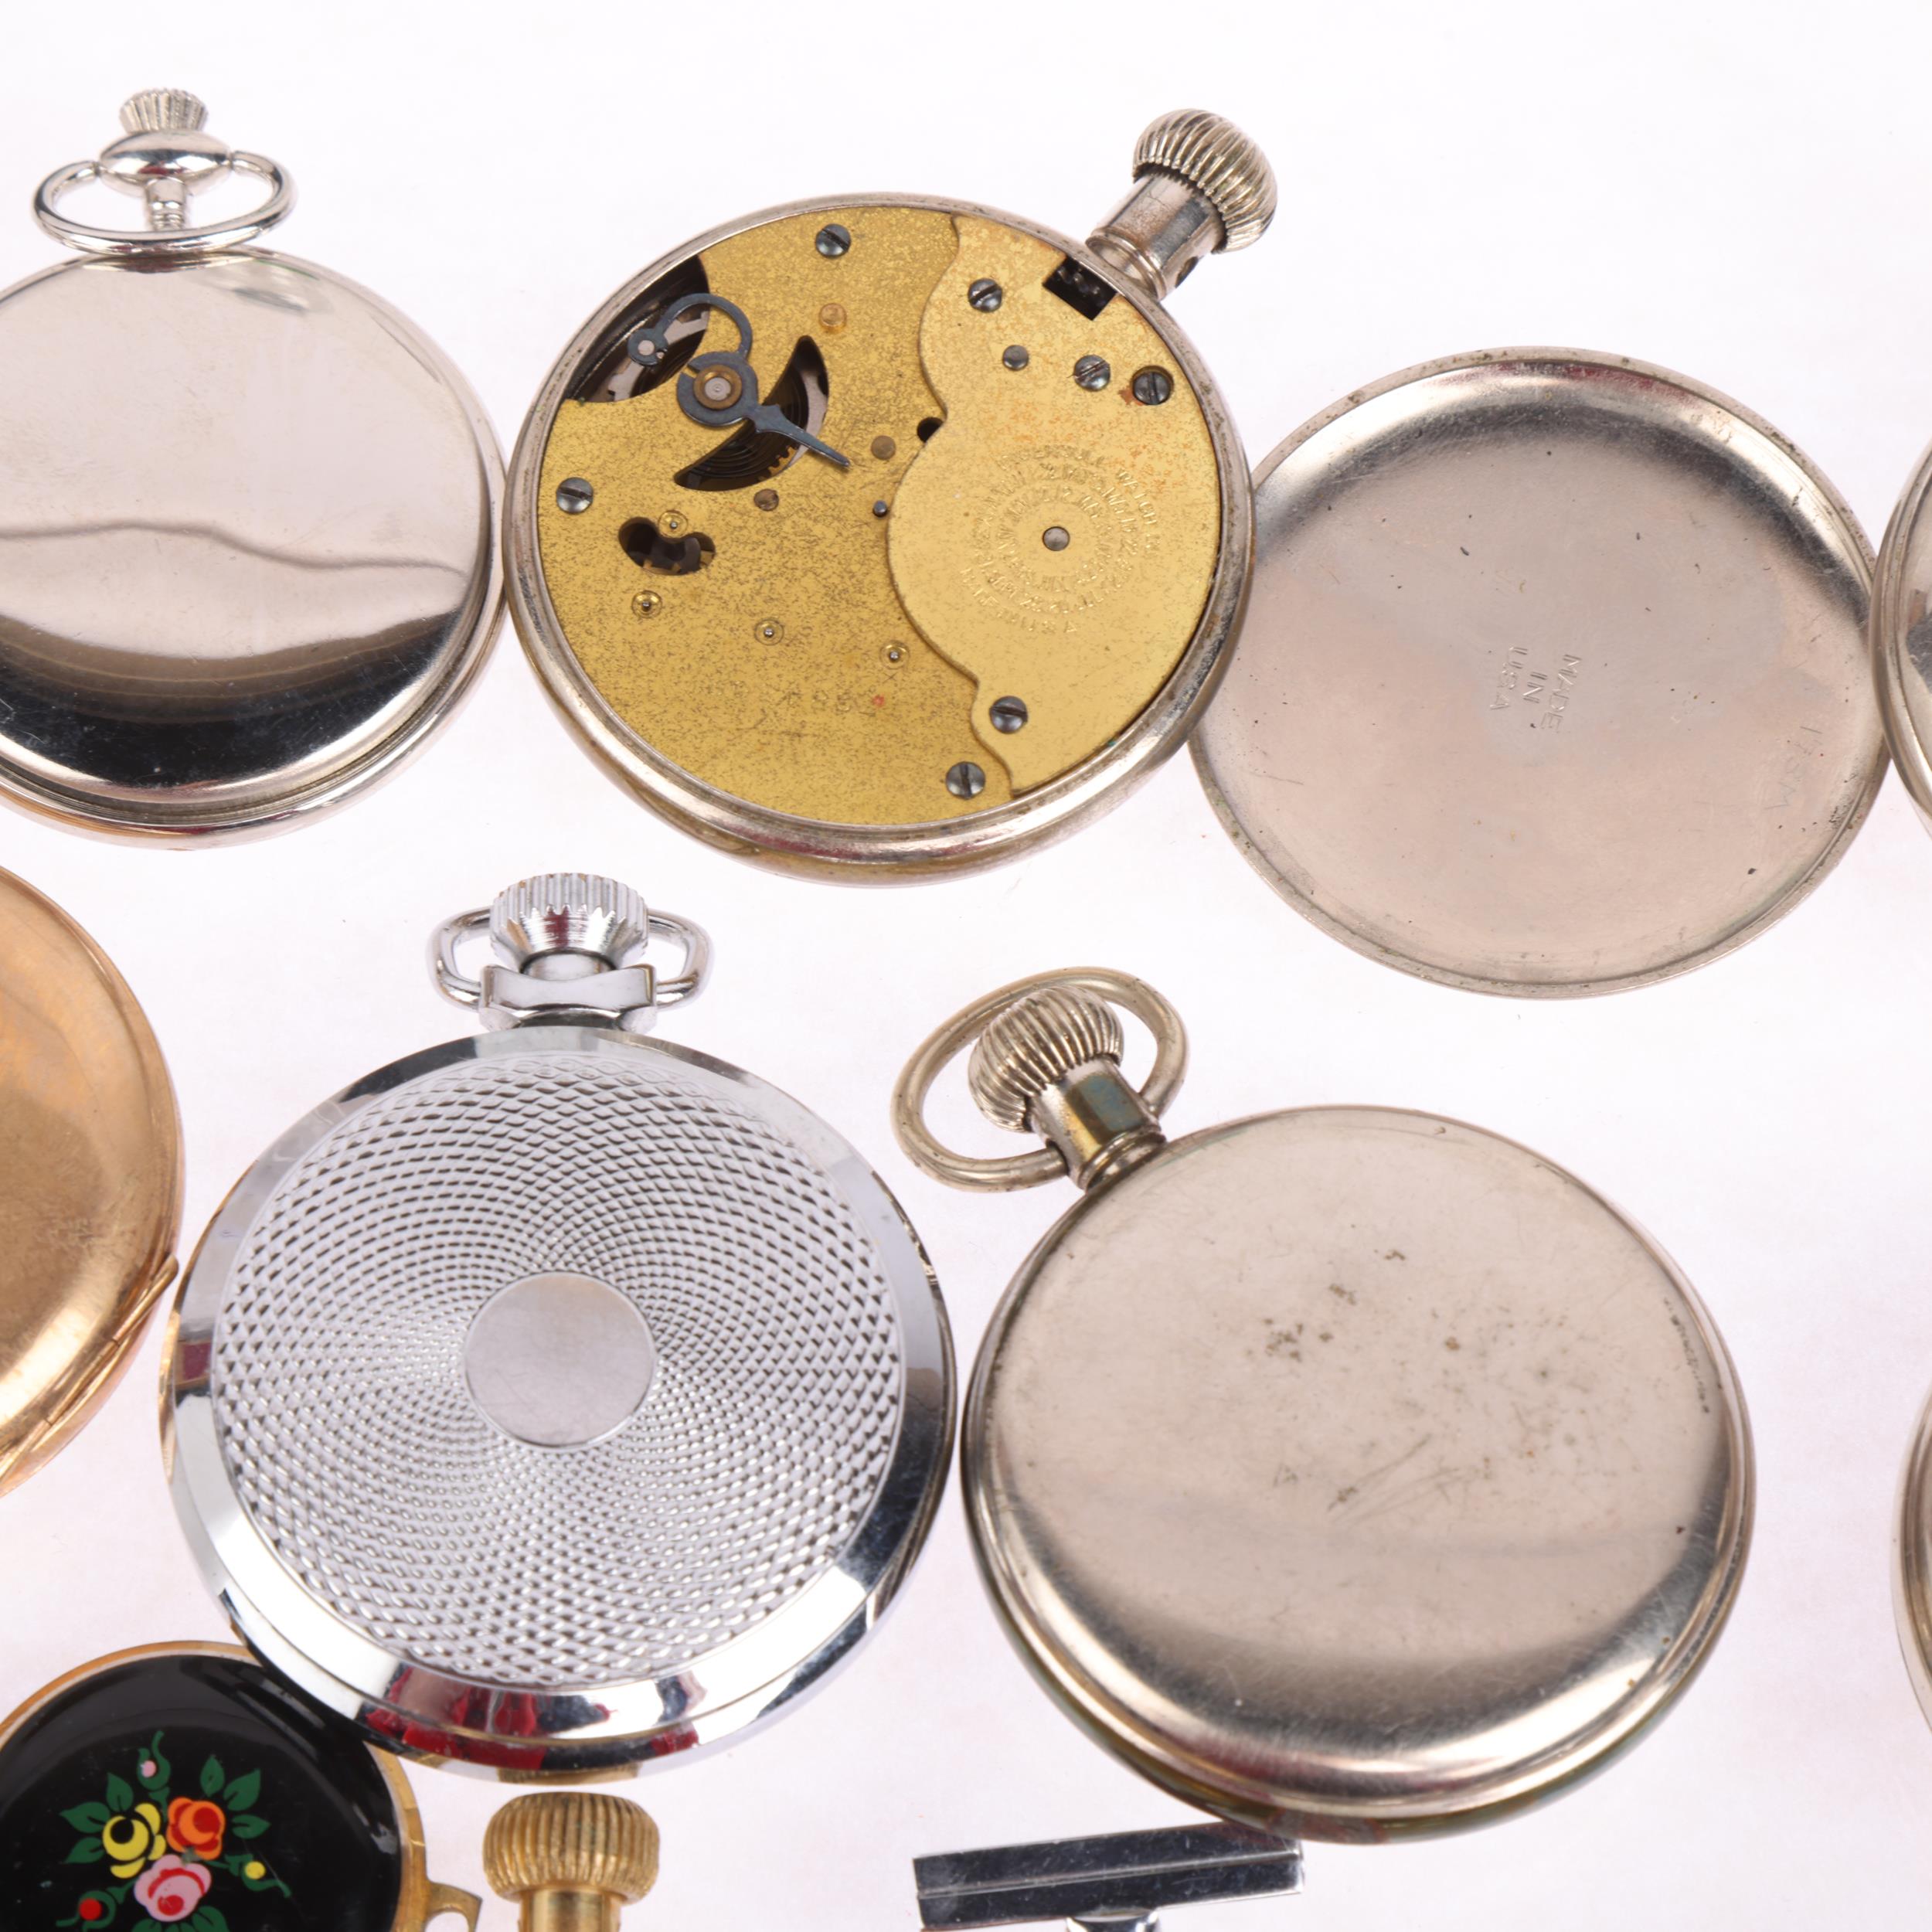 A quantity of pocket watches, makers include Ingersoll, Services, Smiths Empire, etc Condition - Image 4 of 5